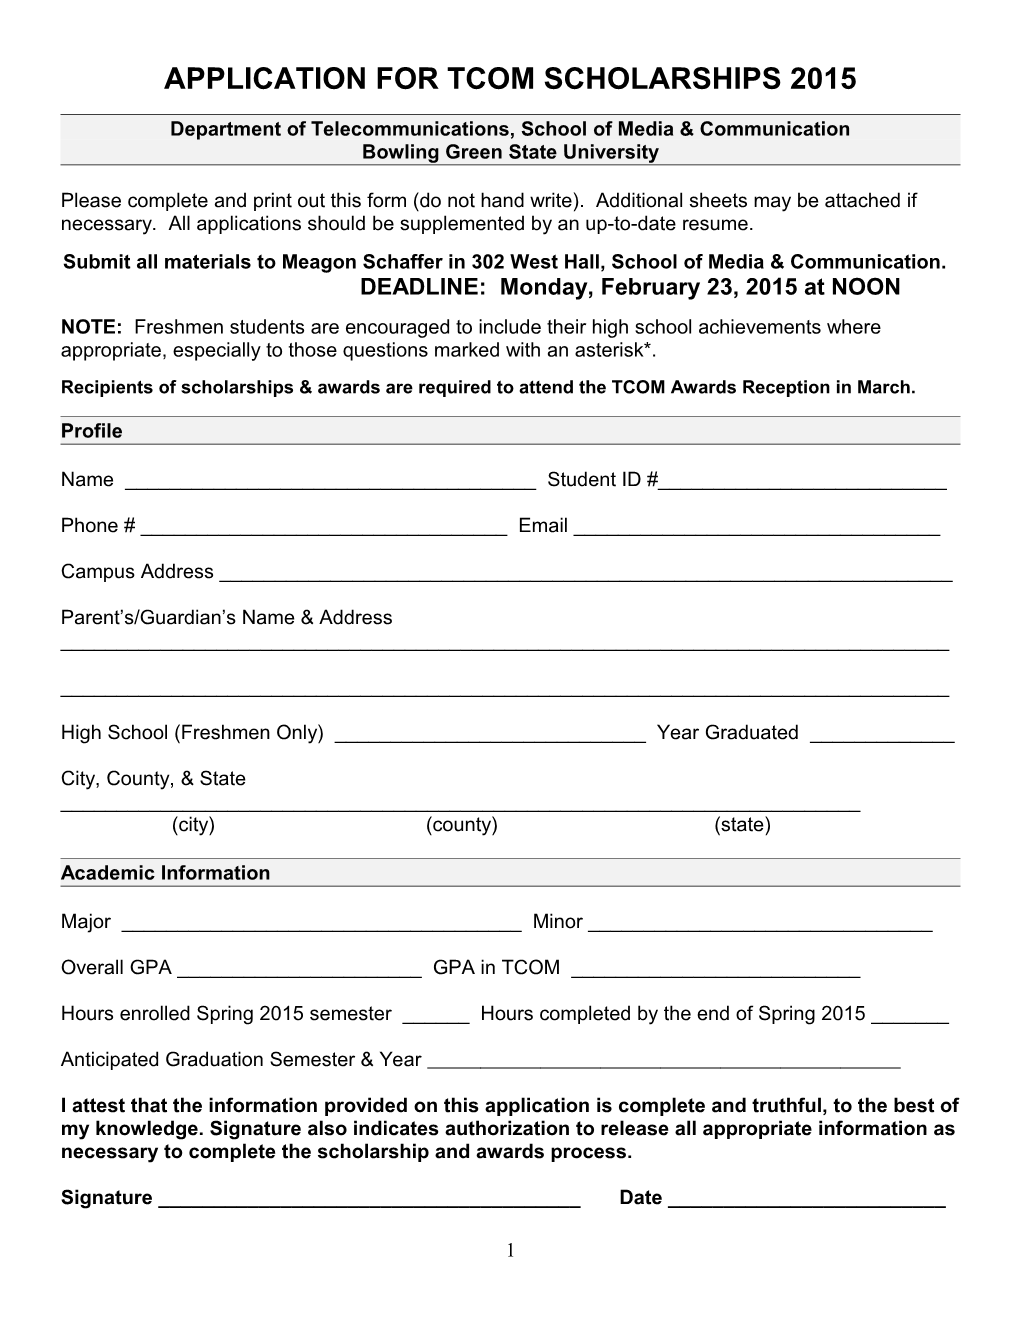 Application for Scholarship Aid